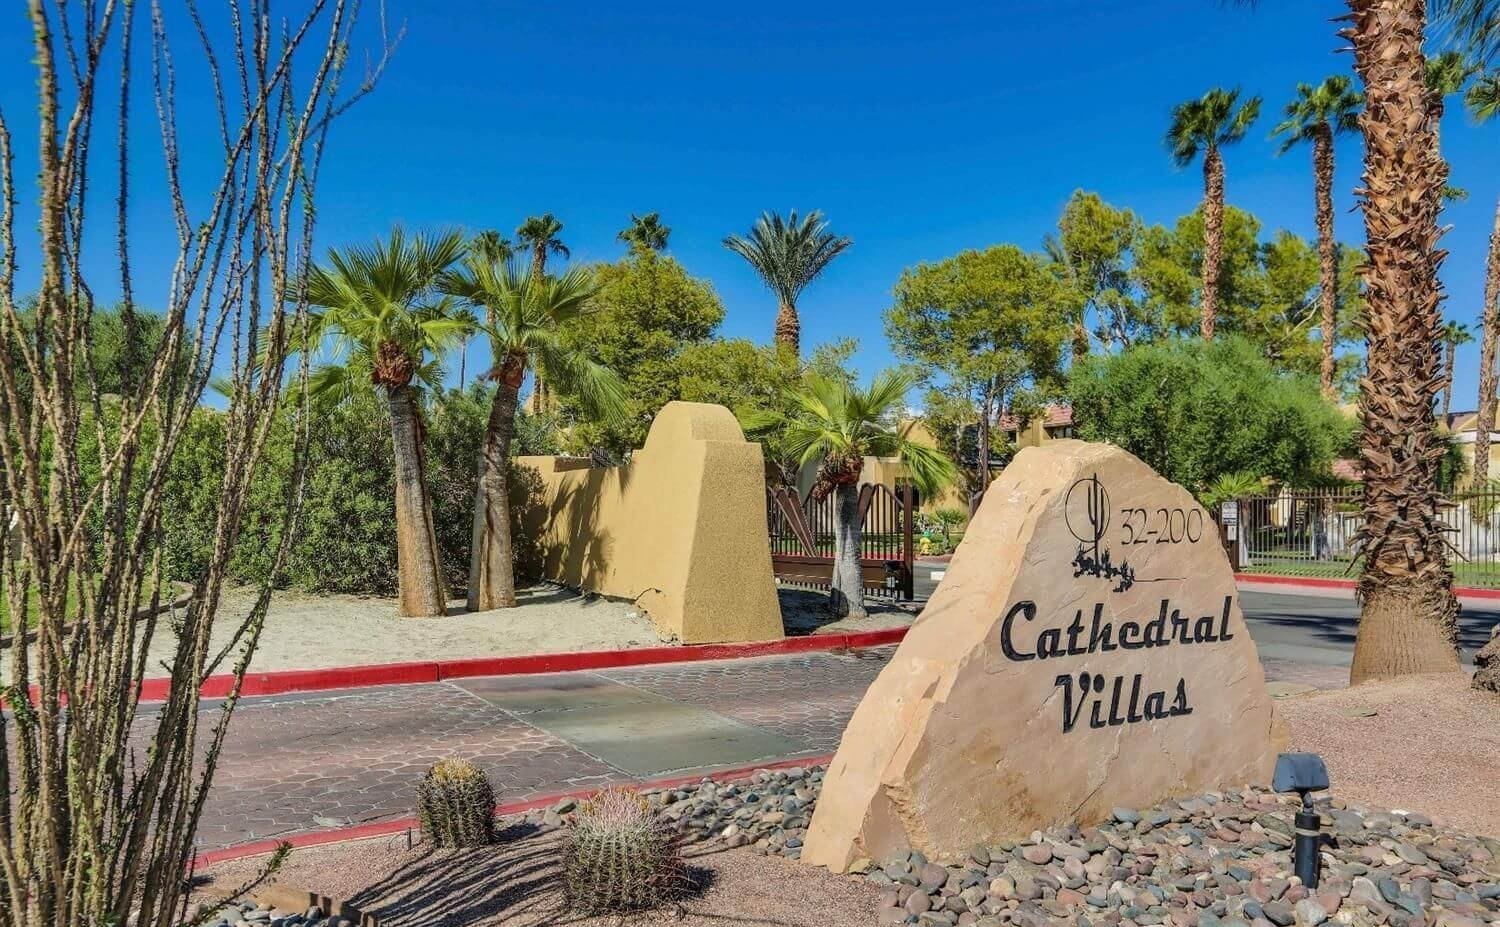 Cathedral Villas Cathedral City 92234